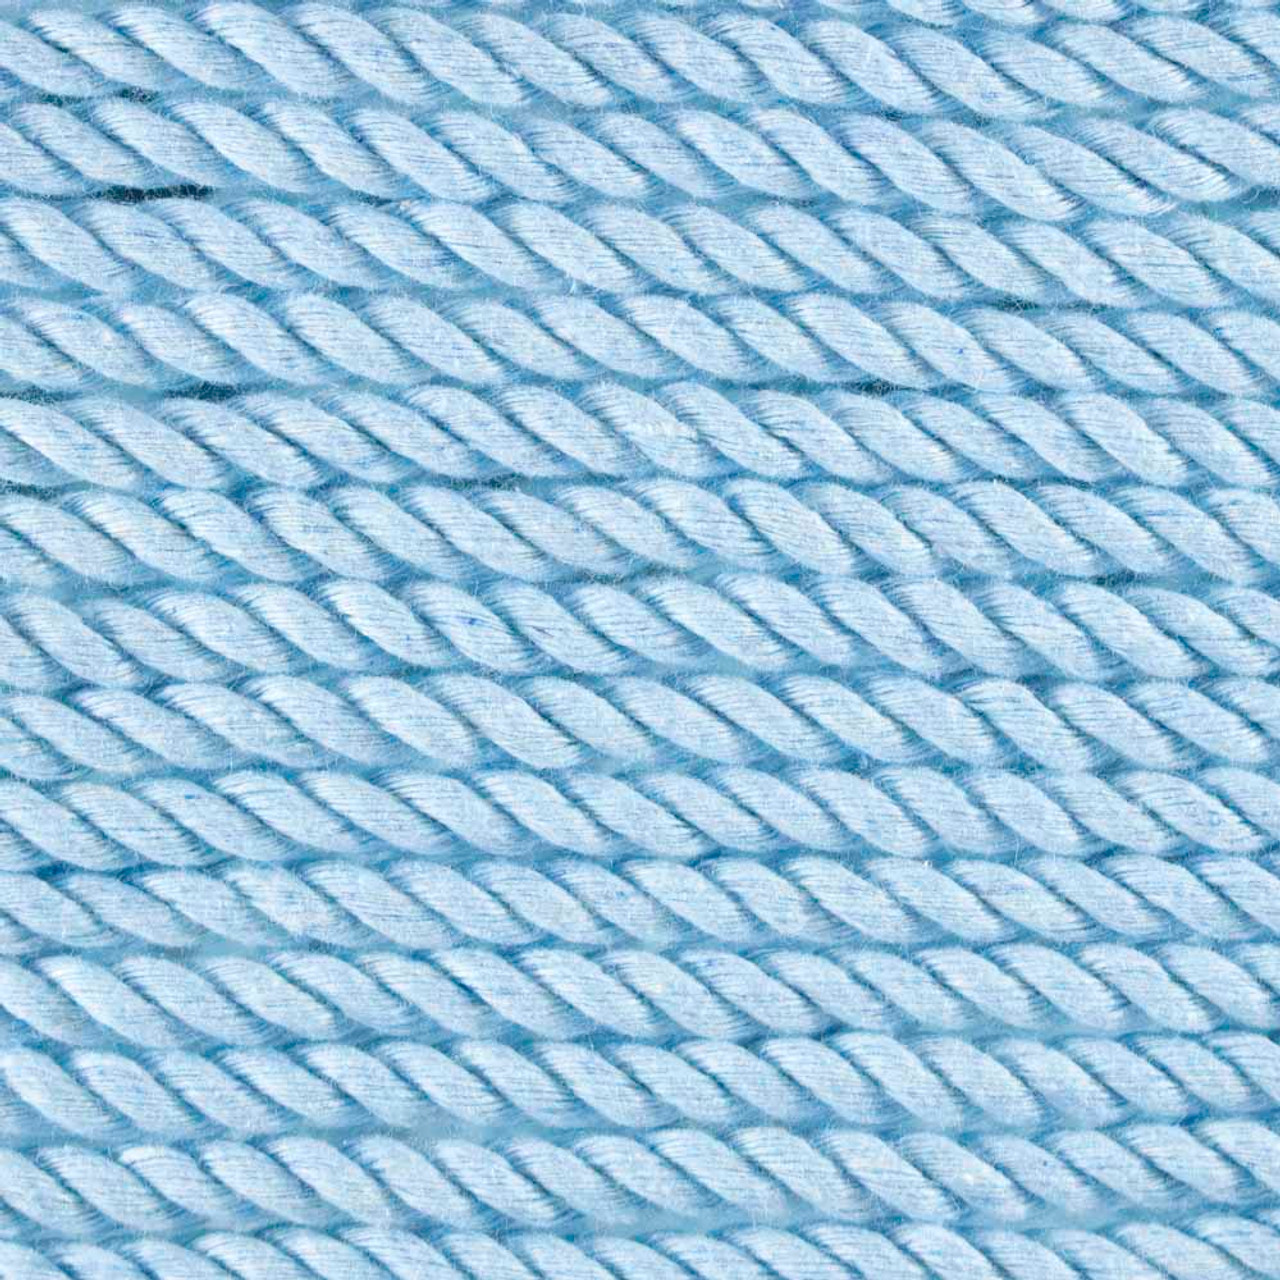 3-Strand Twisted Cotton 1/4 inch Rope - Sky Blue